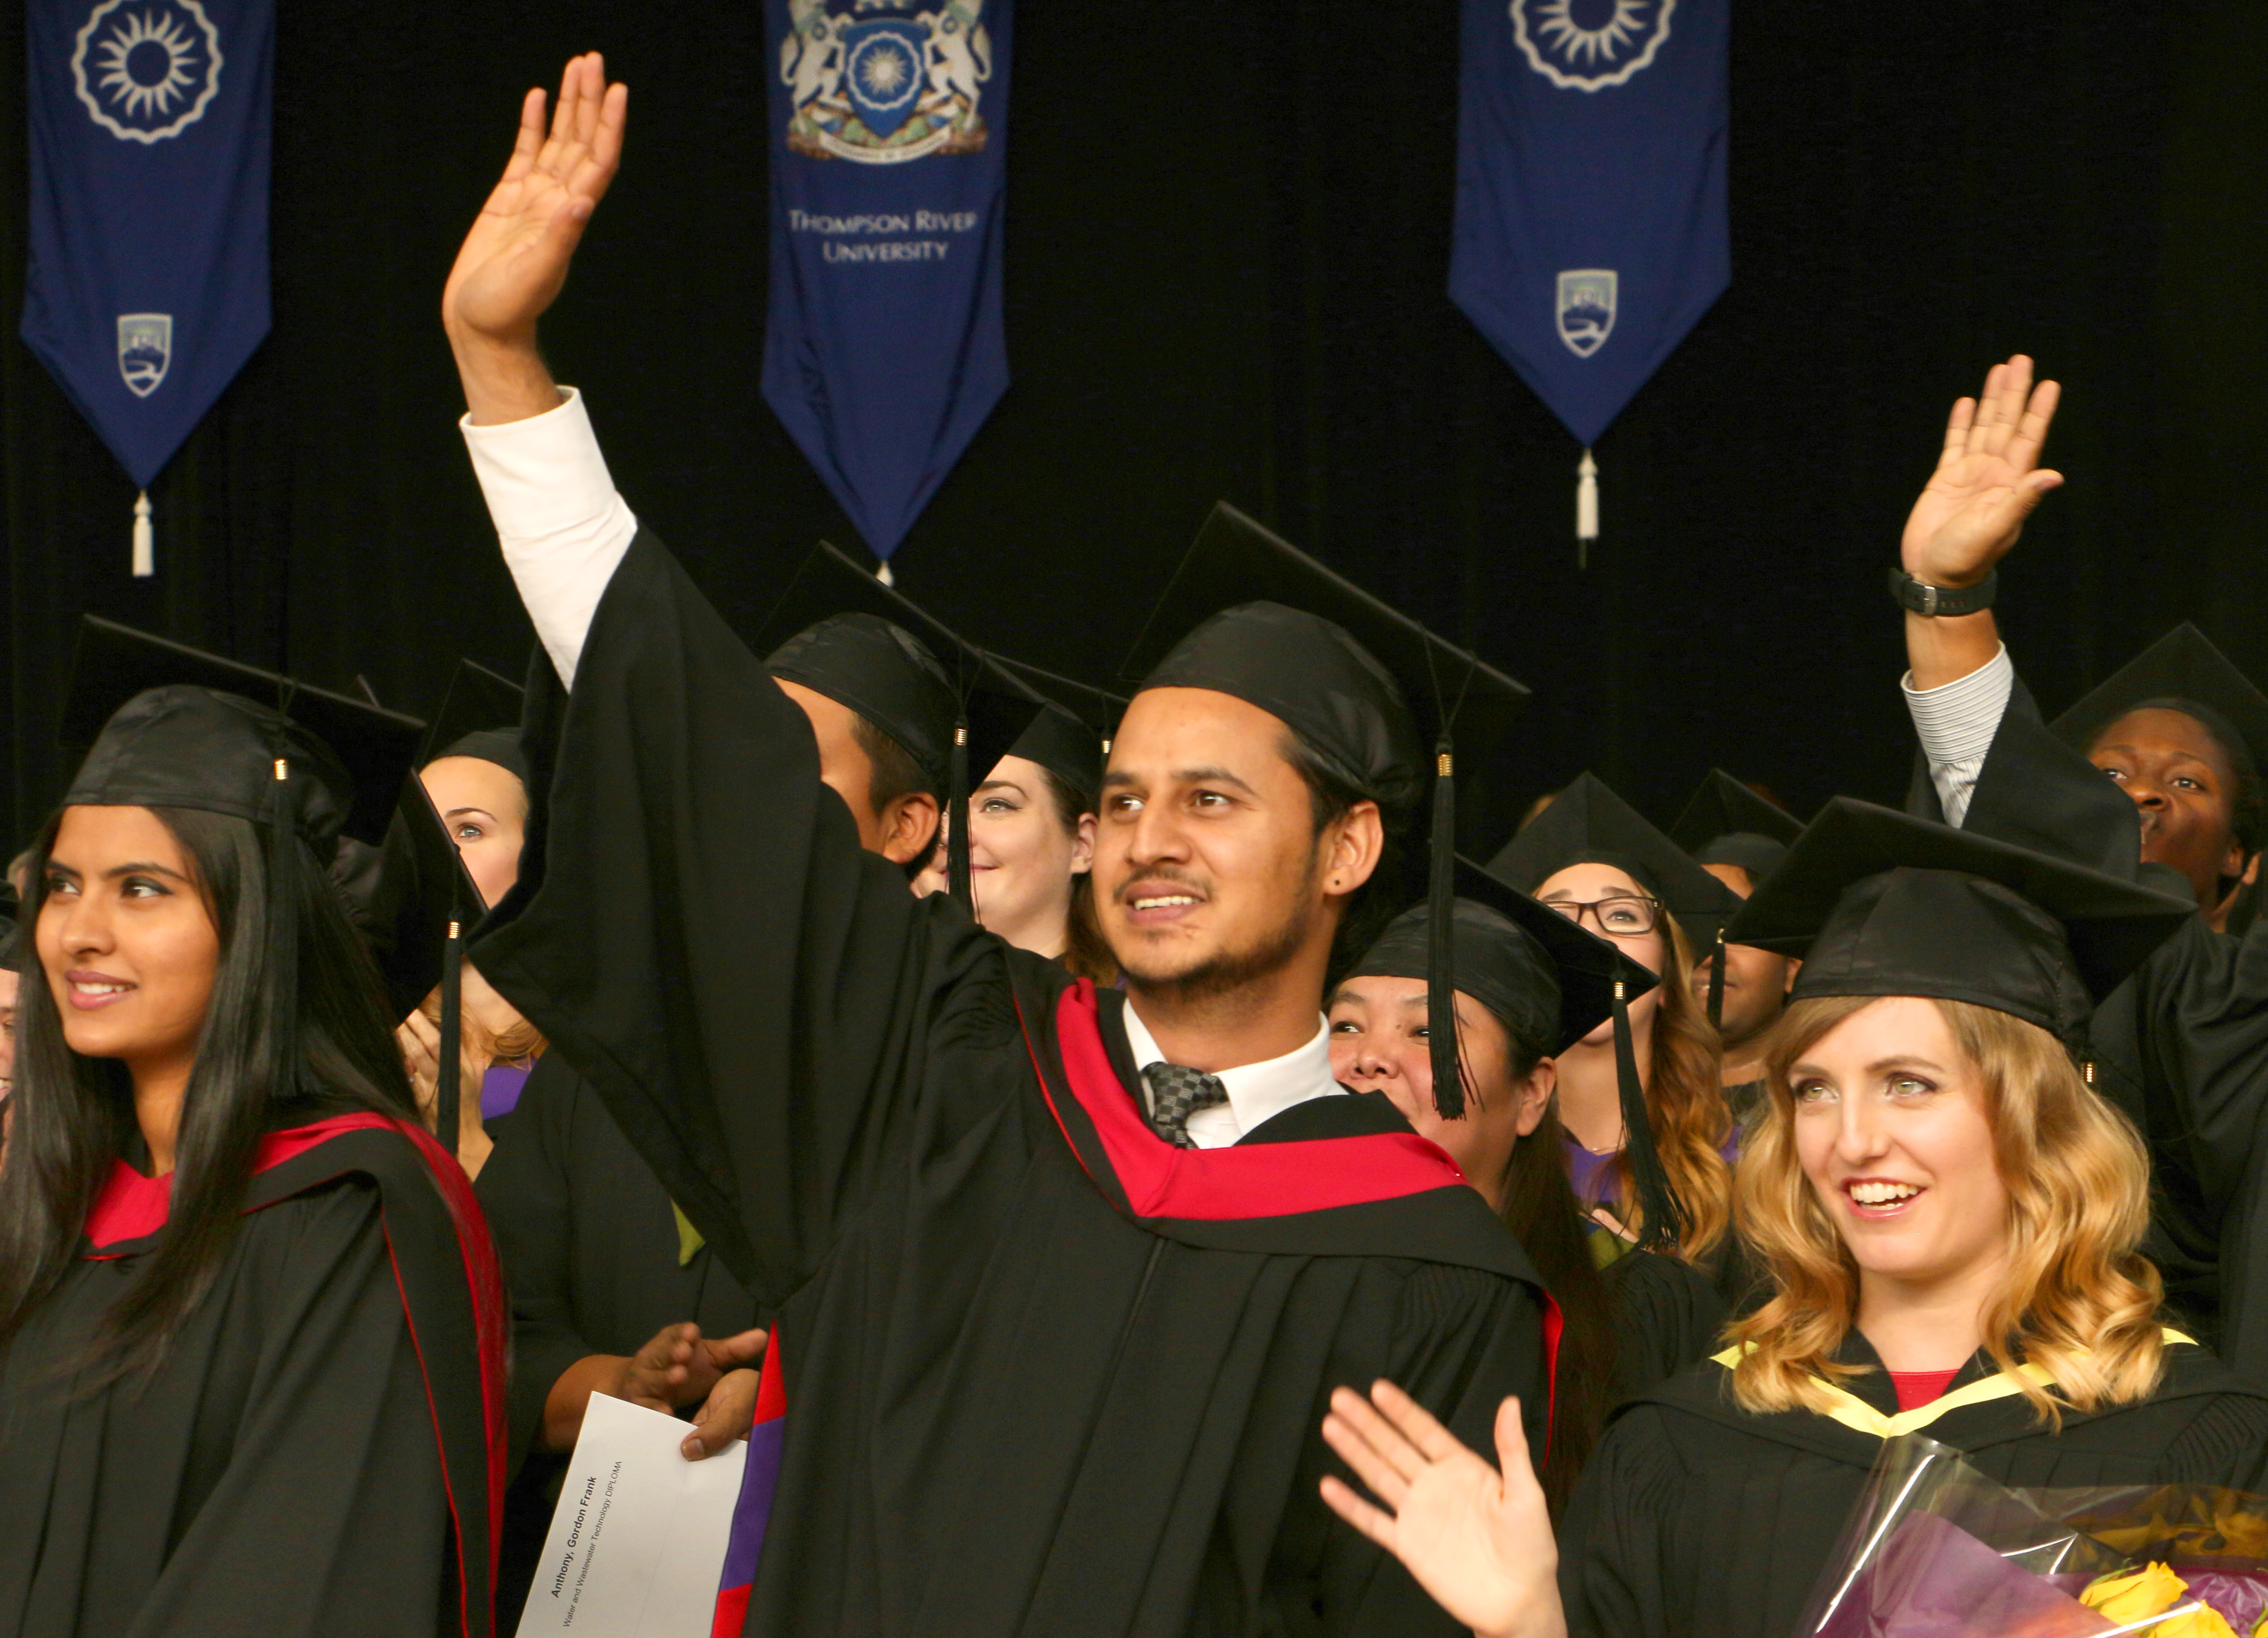 Fall Convocation 2015 held Oct. 16 at the Tournament Capital Centre.